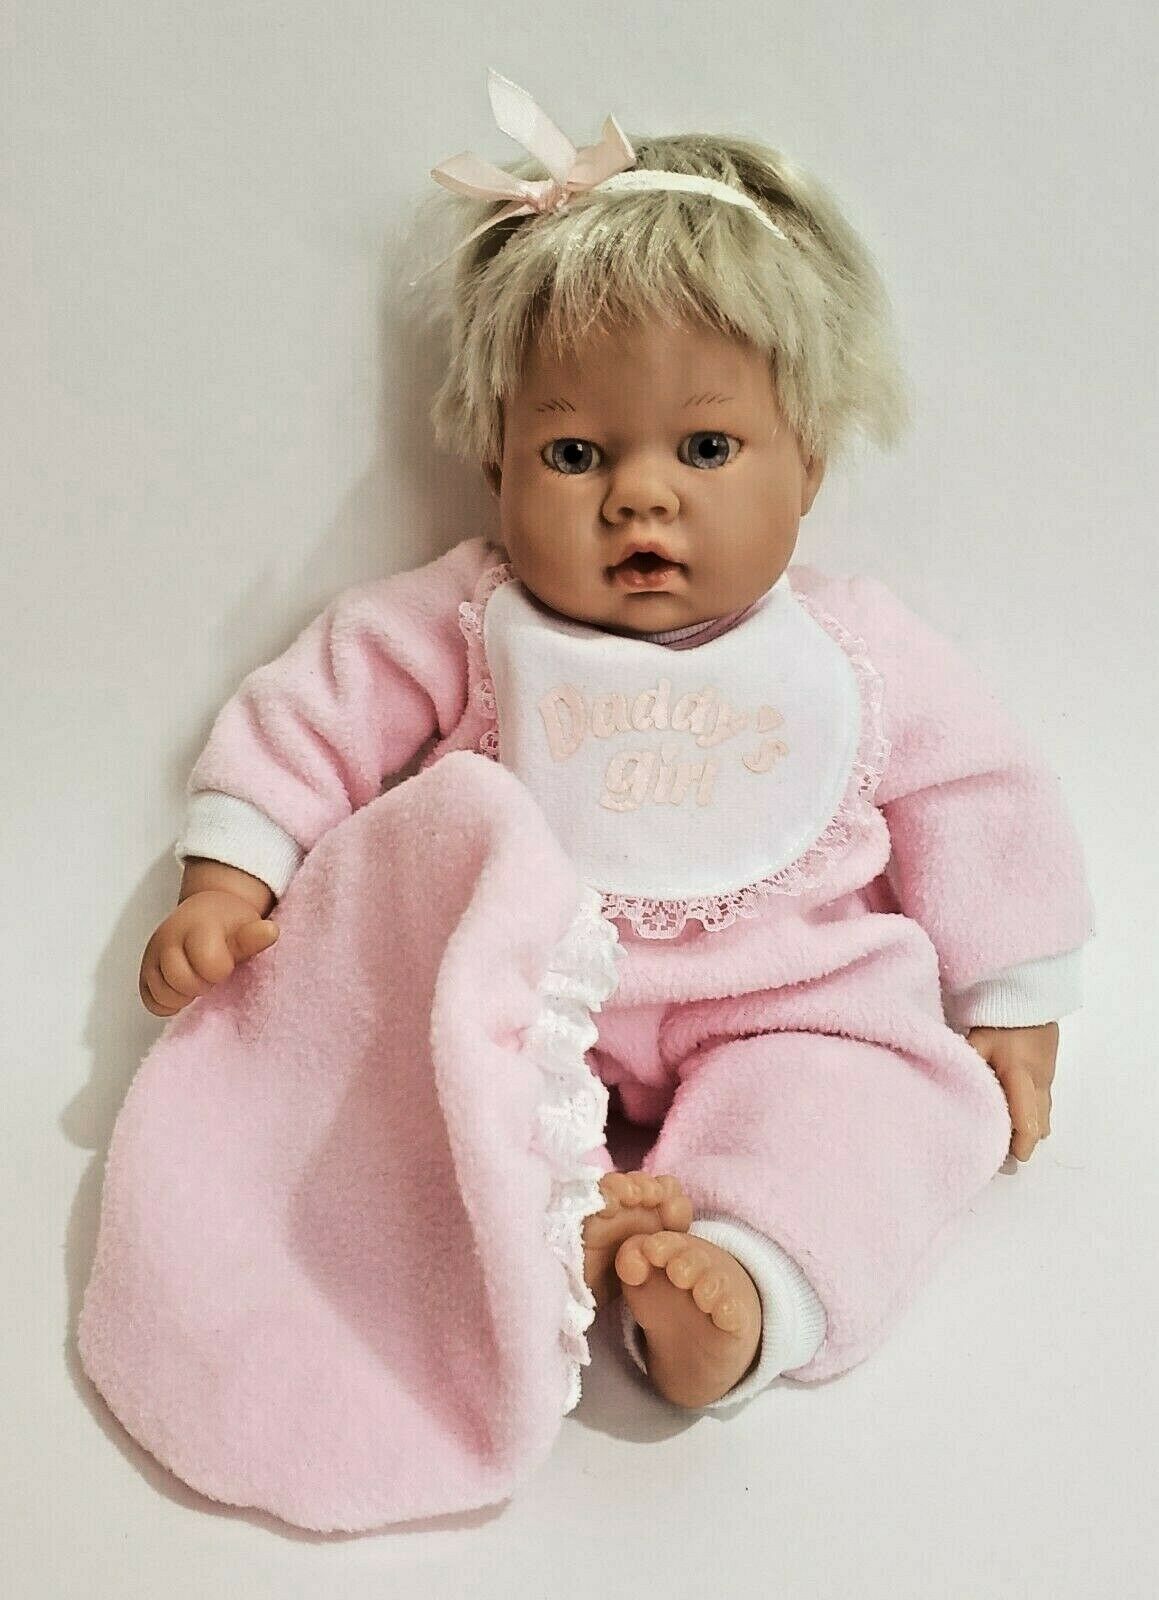 Lee Middleton Baby Doll 2000 Reva Thumb Sucker Blond Adorable Original Outfit